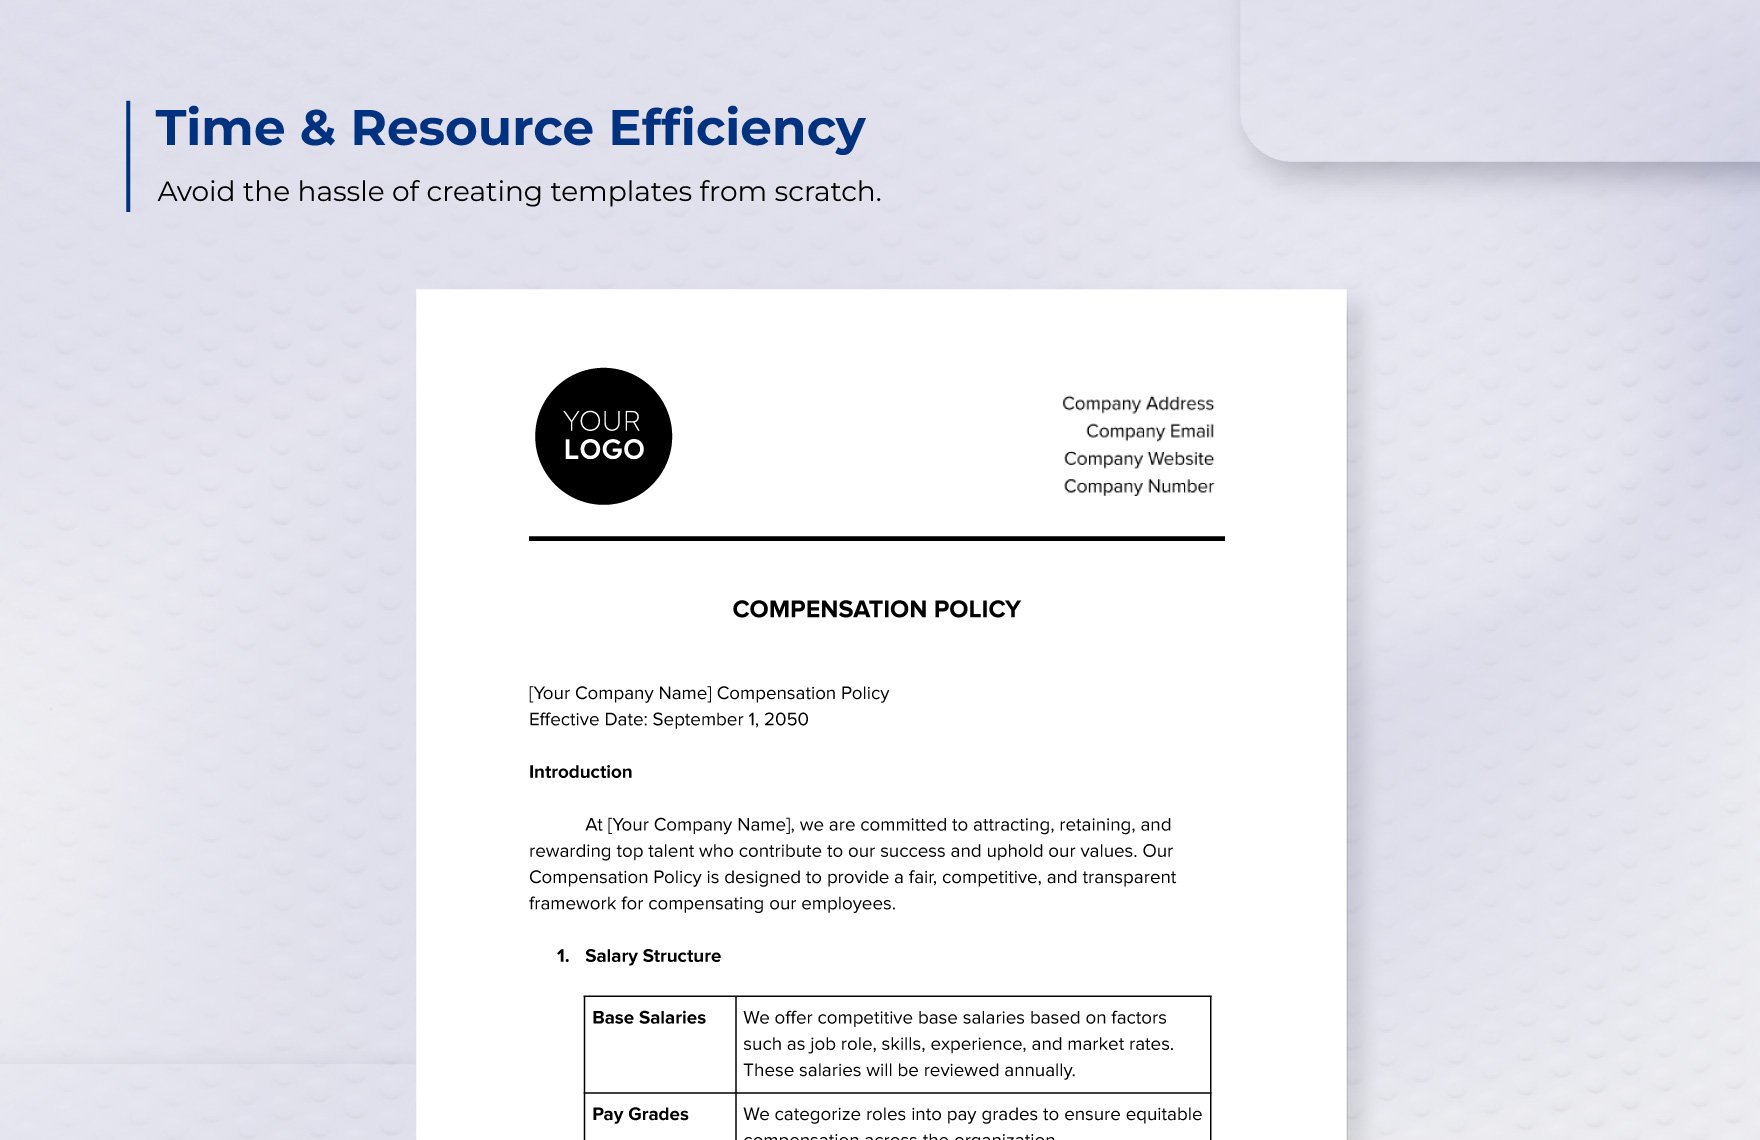 Compensation Policy HR Template